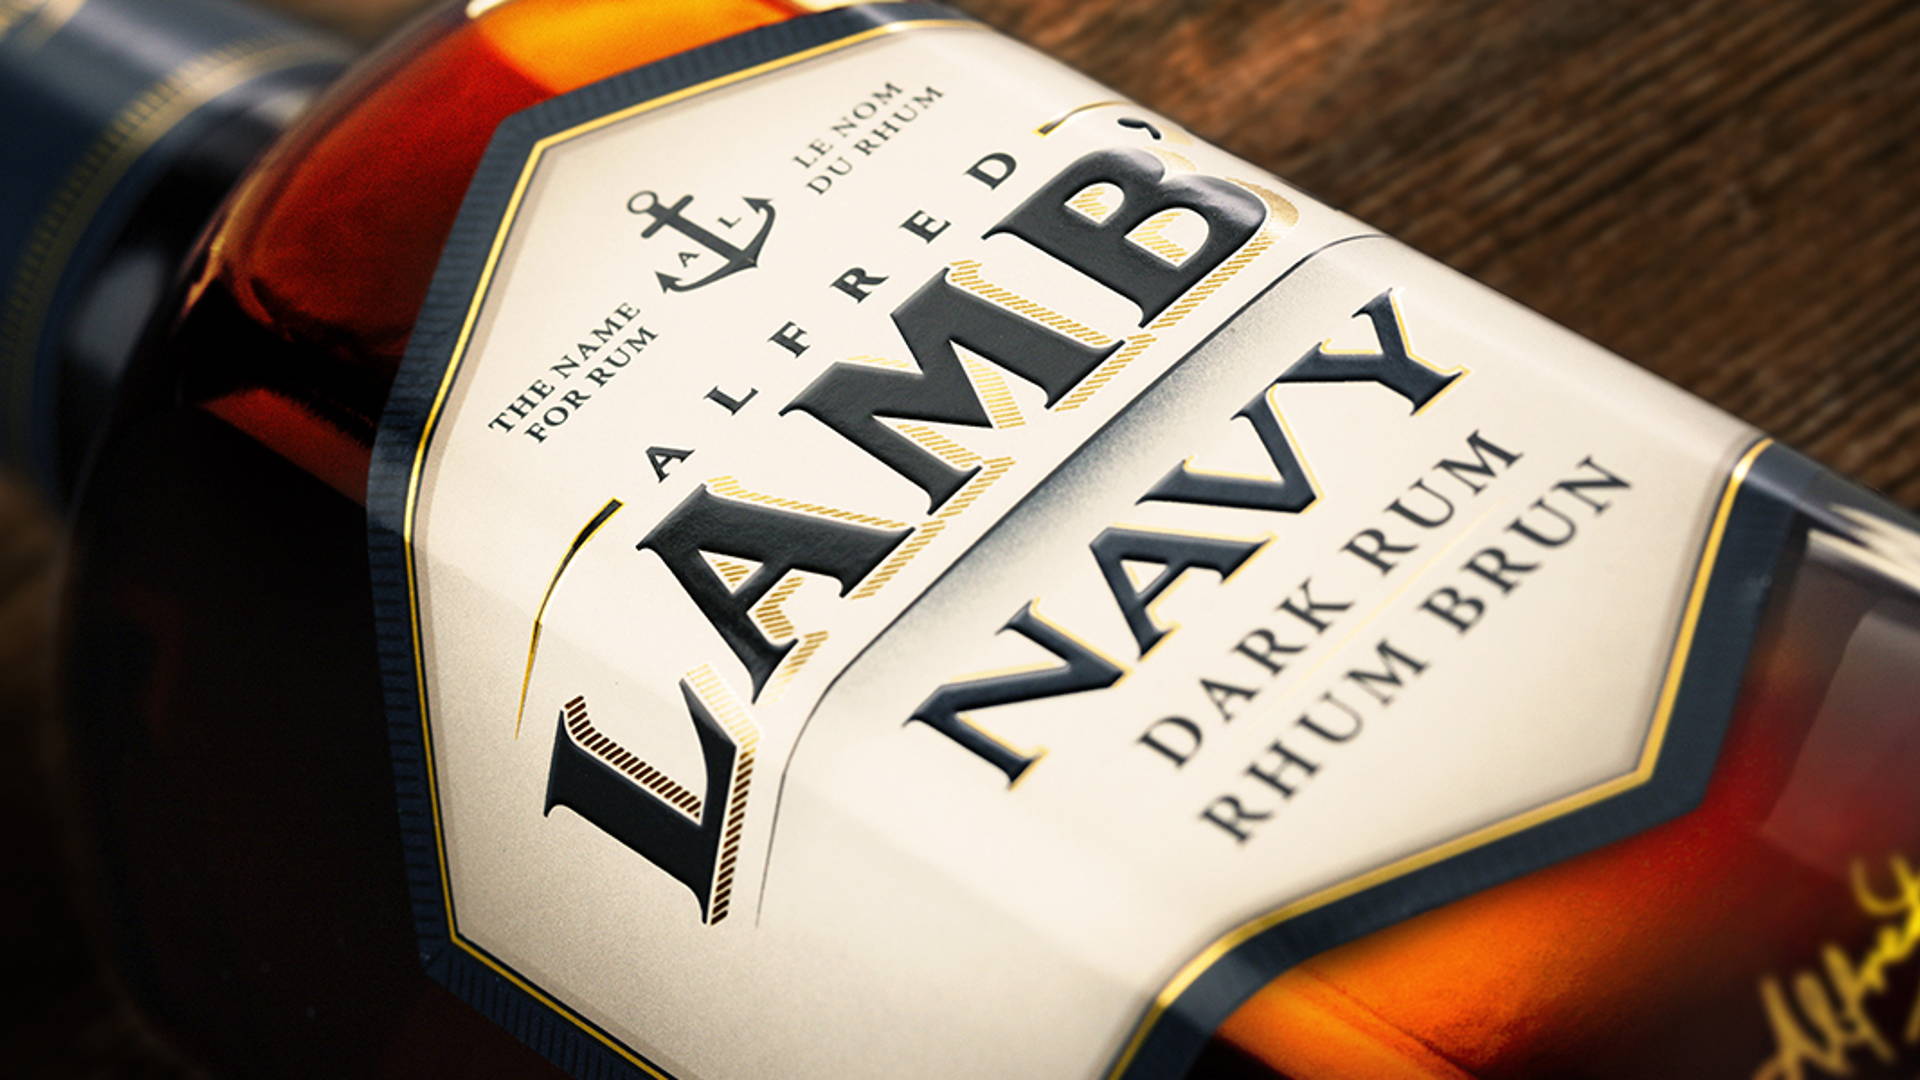 Featured image for Lamb's: A Family of Fine Smooth and Refined Rums